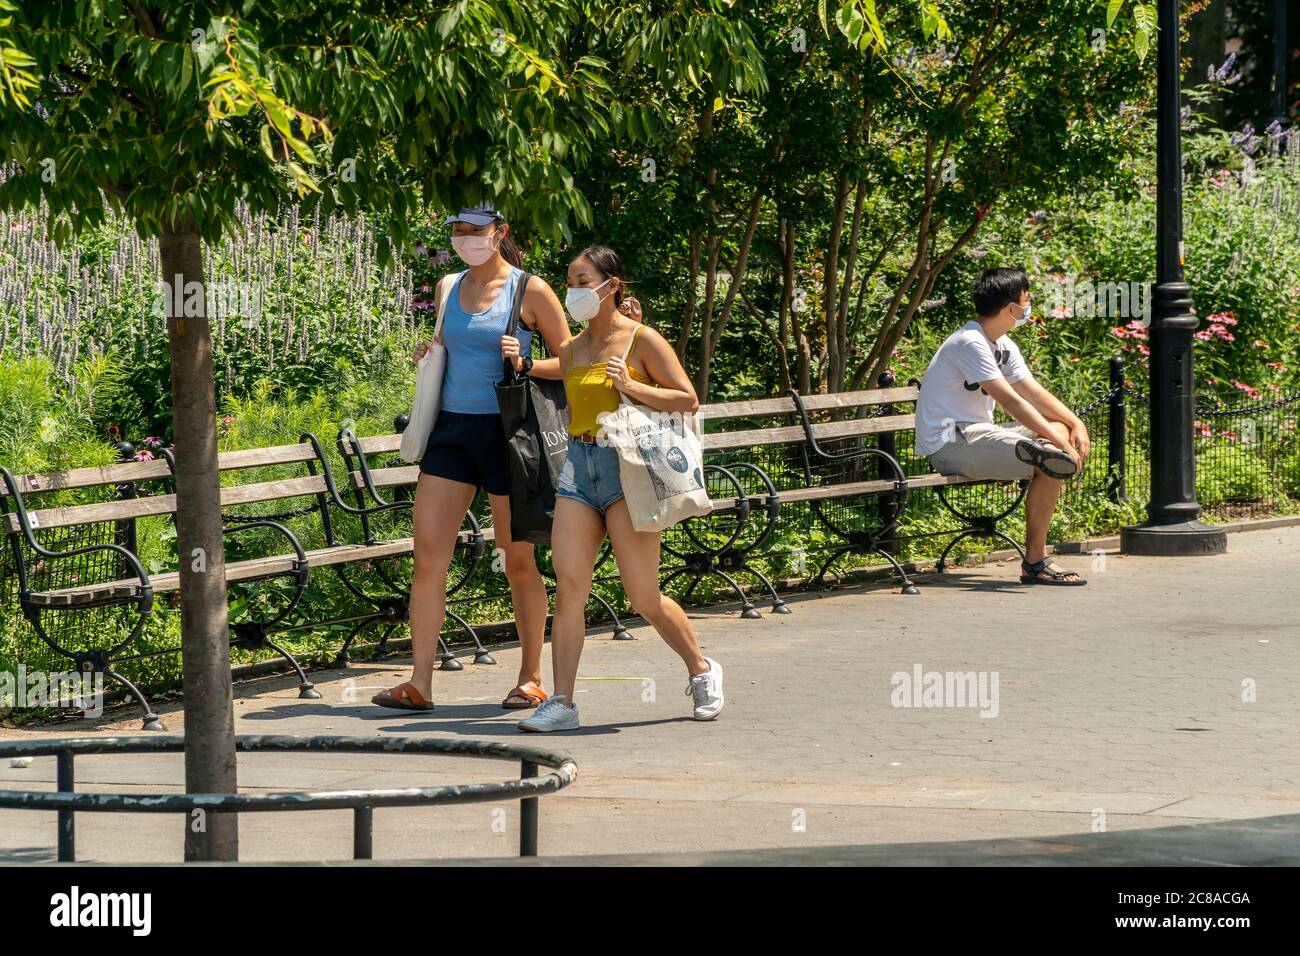 New Yorkers and visitors in Washington Square Park in Greenwich Village in New York on Sunday, July 19, 2020. The city is suffering through min-90s temperatures with Monday’s expected “real-feel” temperature passing 100 degrees. . (© Richard B. Levine) Stock Photo